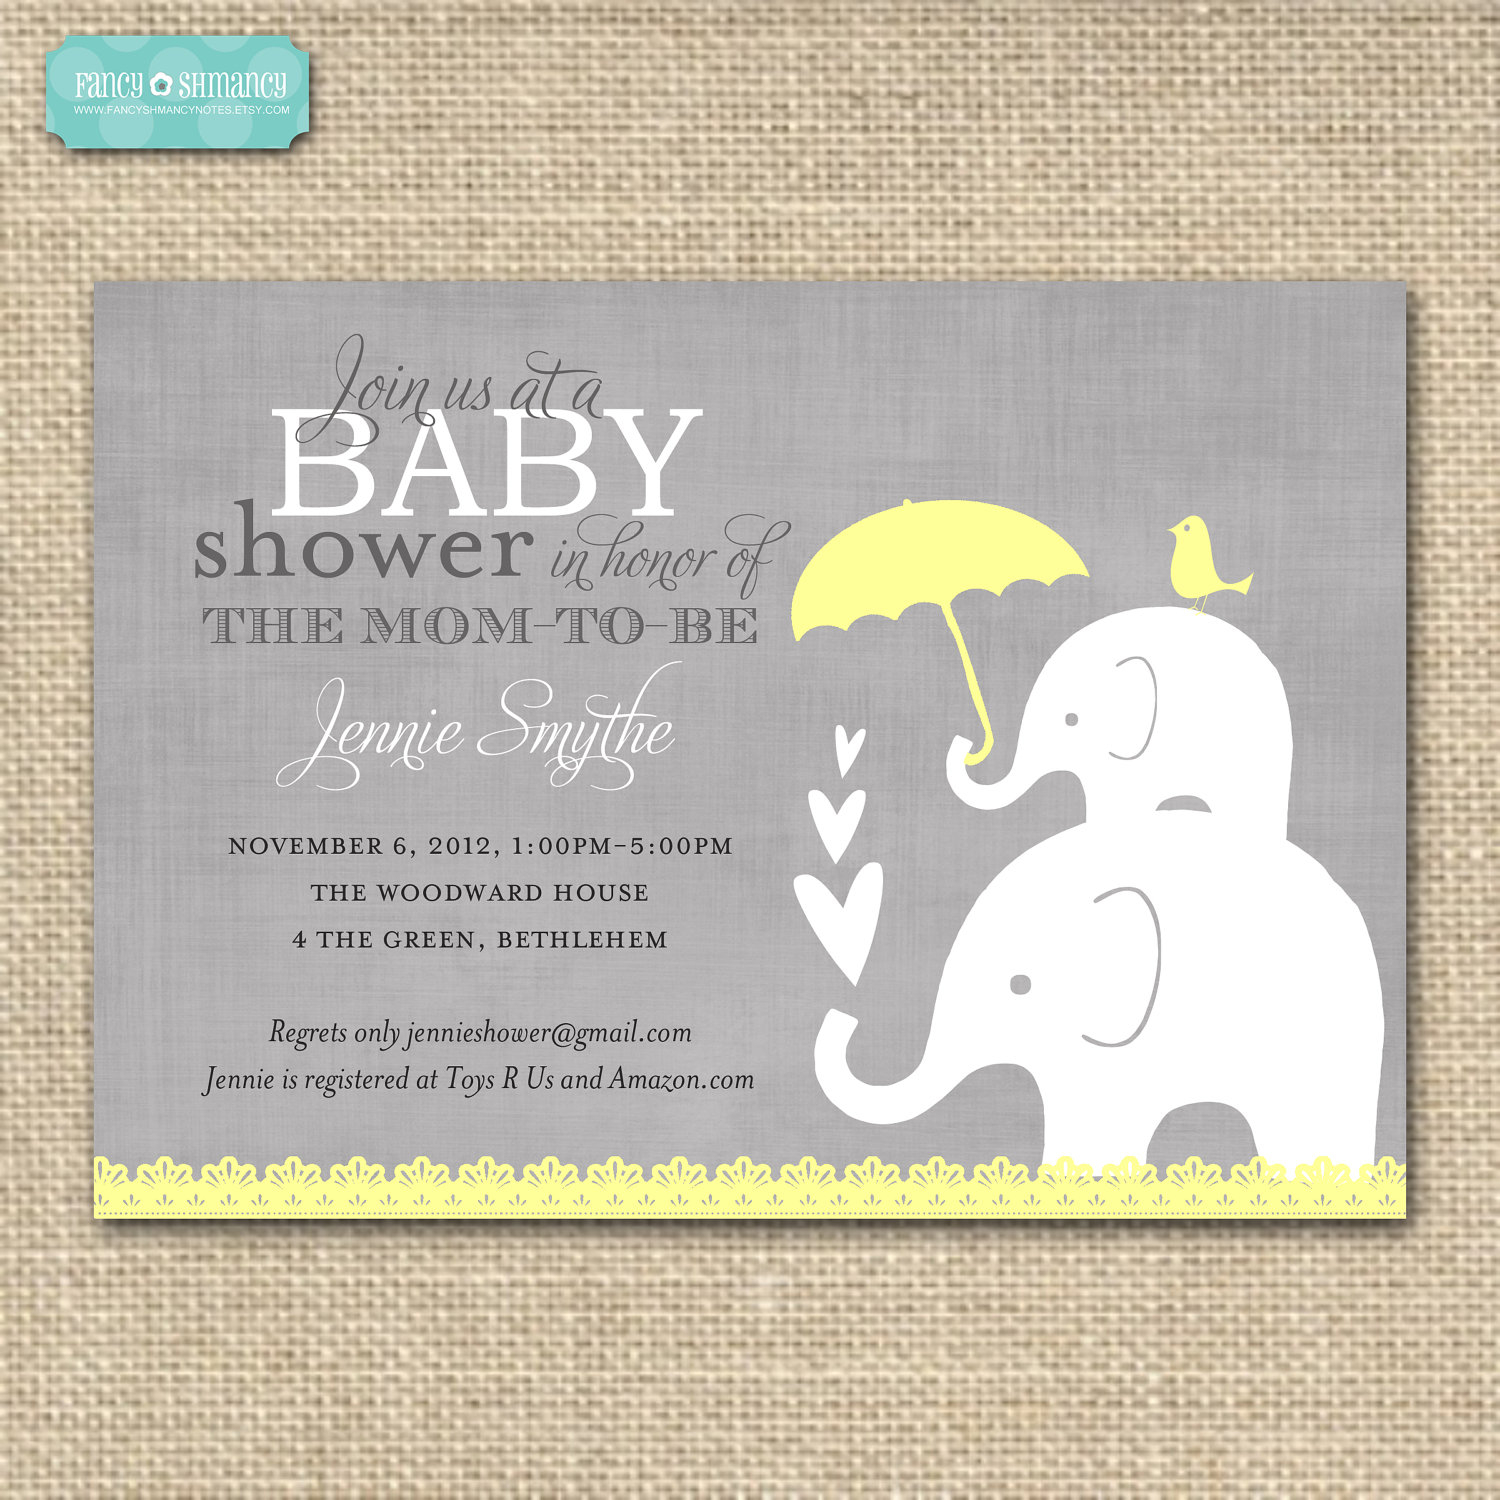 Full Size of Baby Shower:inspirational Elephant Baby Shower Invitations Photo Concepts Elephant Baby Shower Invitations And Homemade Baby Shower Gifts With Baby Shower Labels Plus Baby Shower Door Prizes Together With Baby Shower Tea As Well As Baby Shower Templates